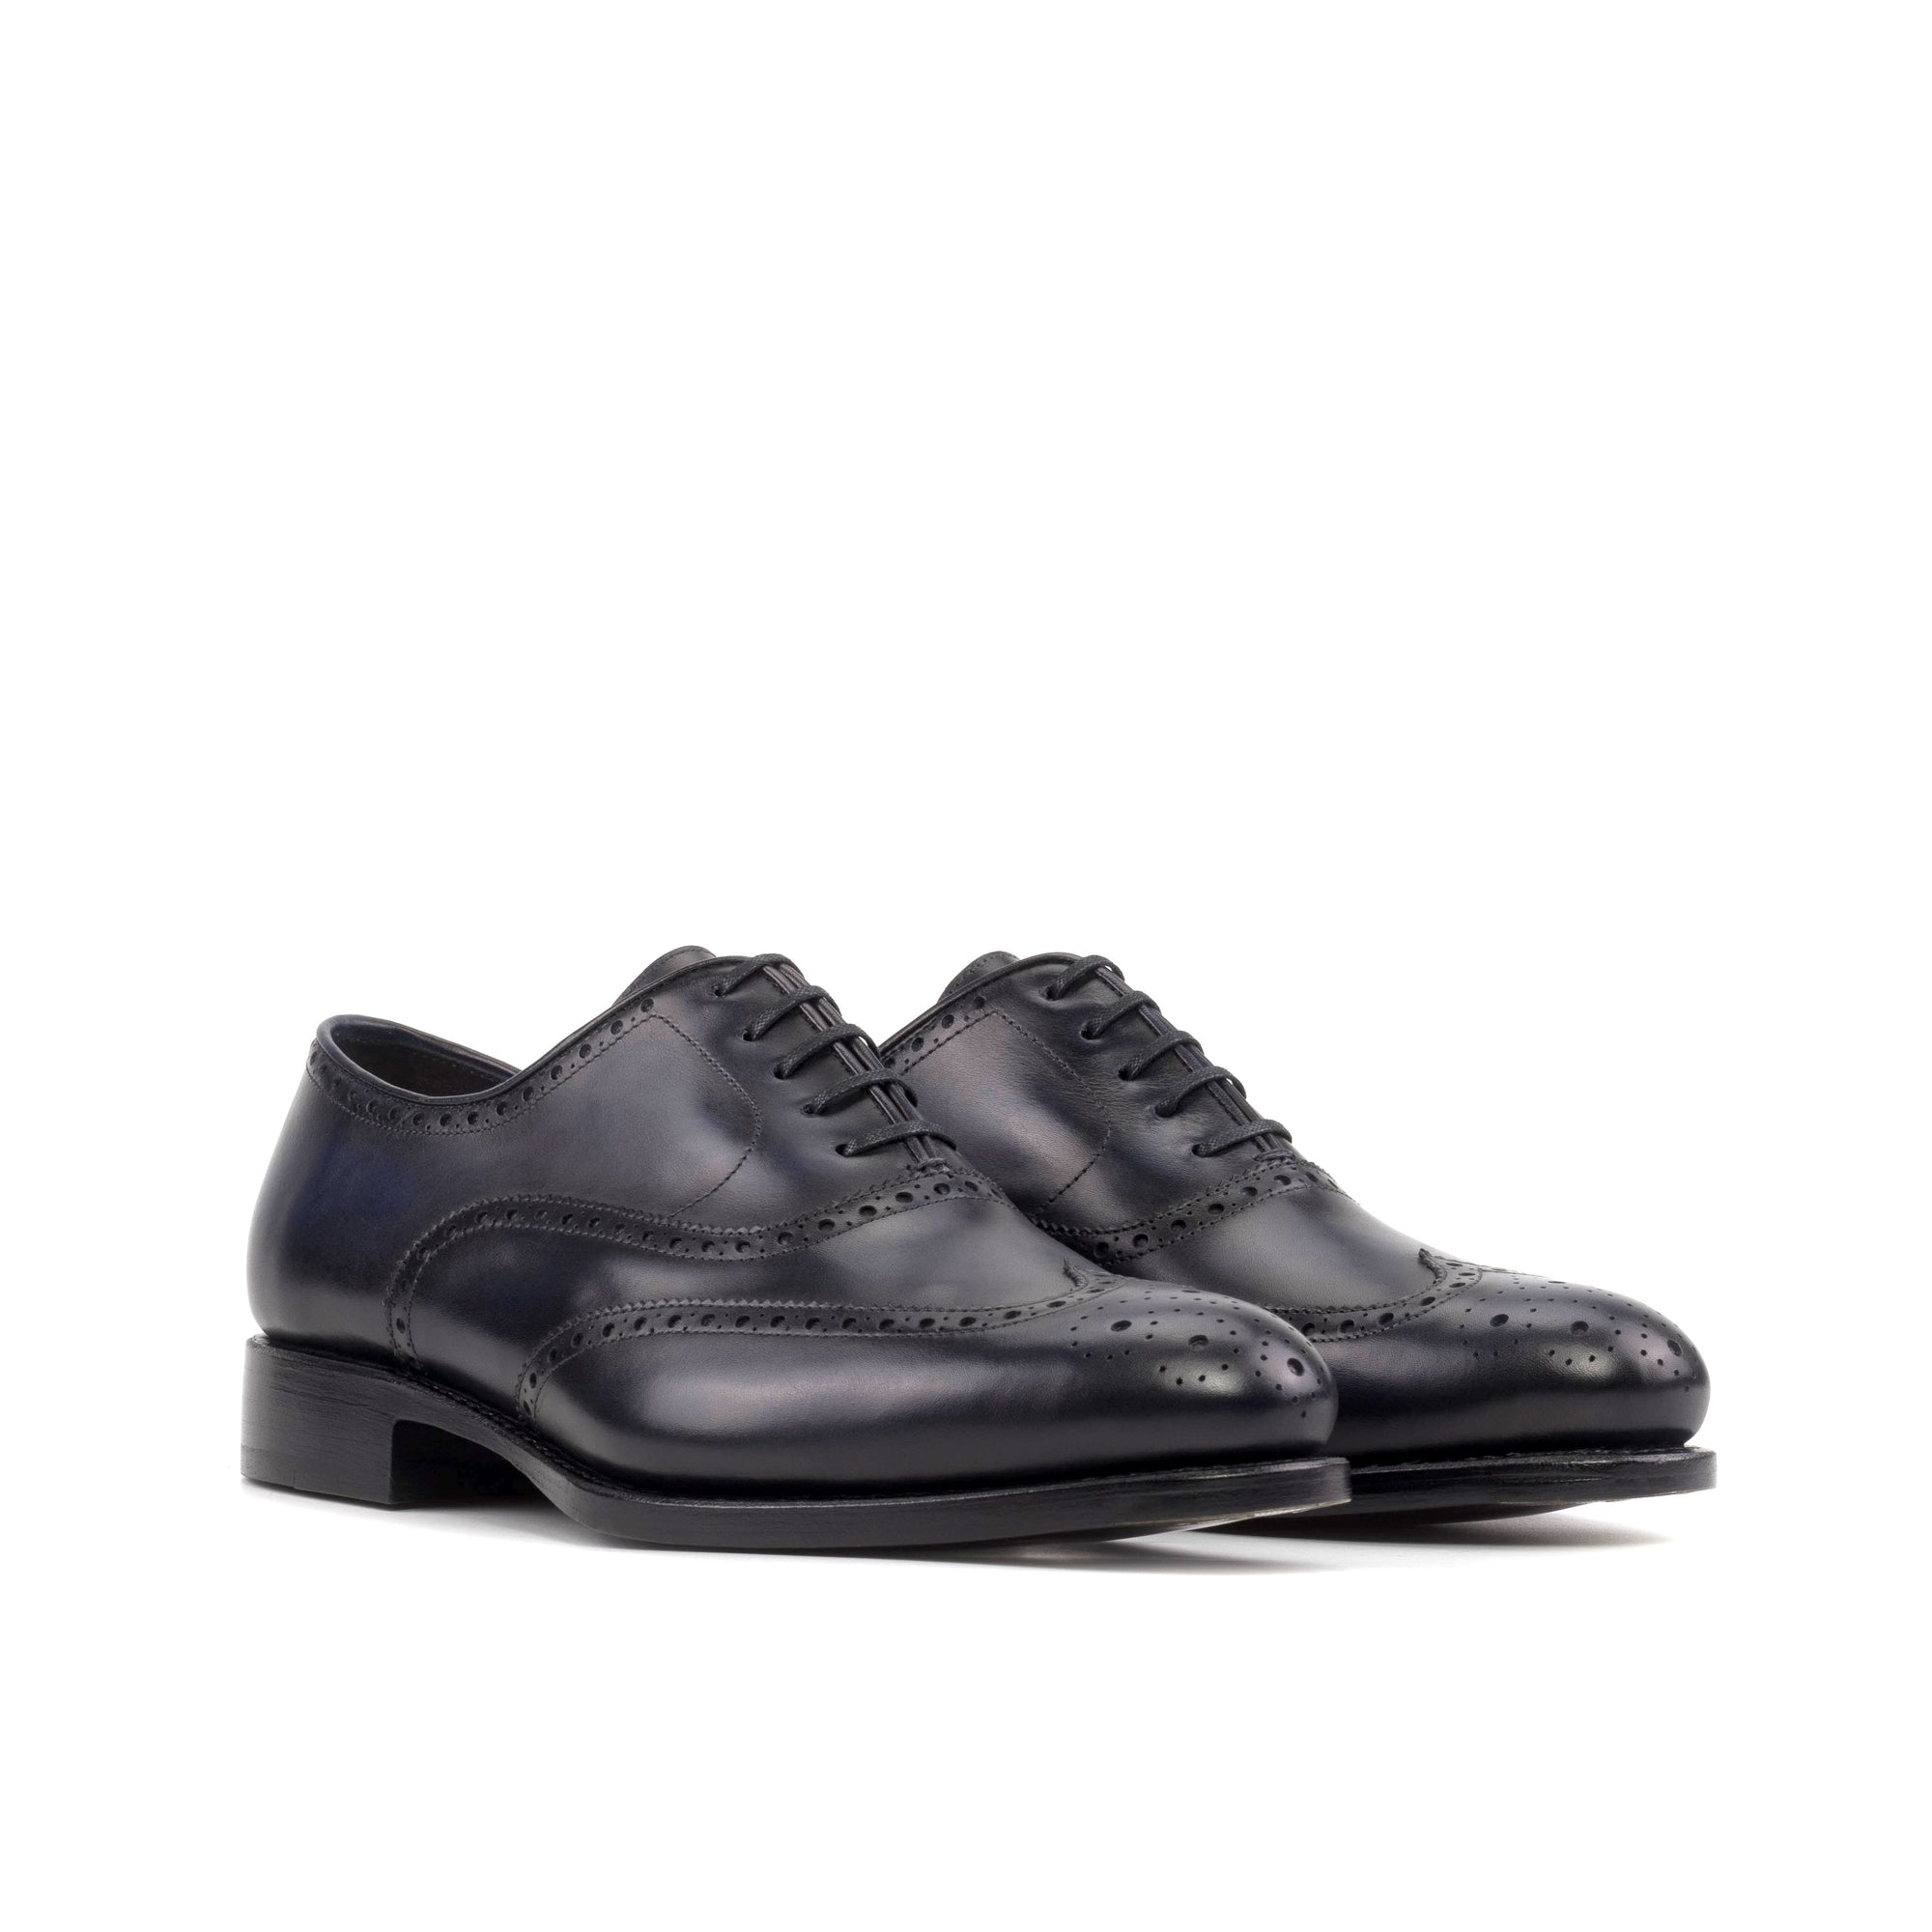 Navy blue Goodyear Welted Wingtip Oxford Brogue Dress Shoes